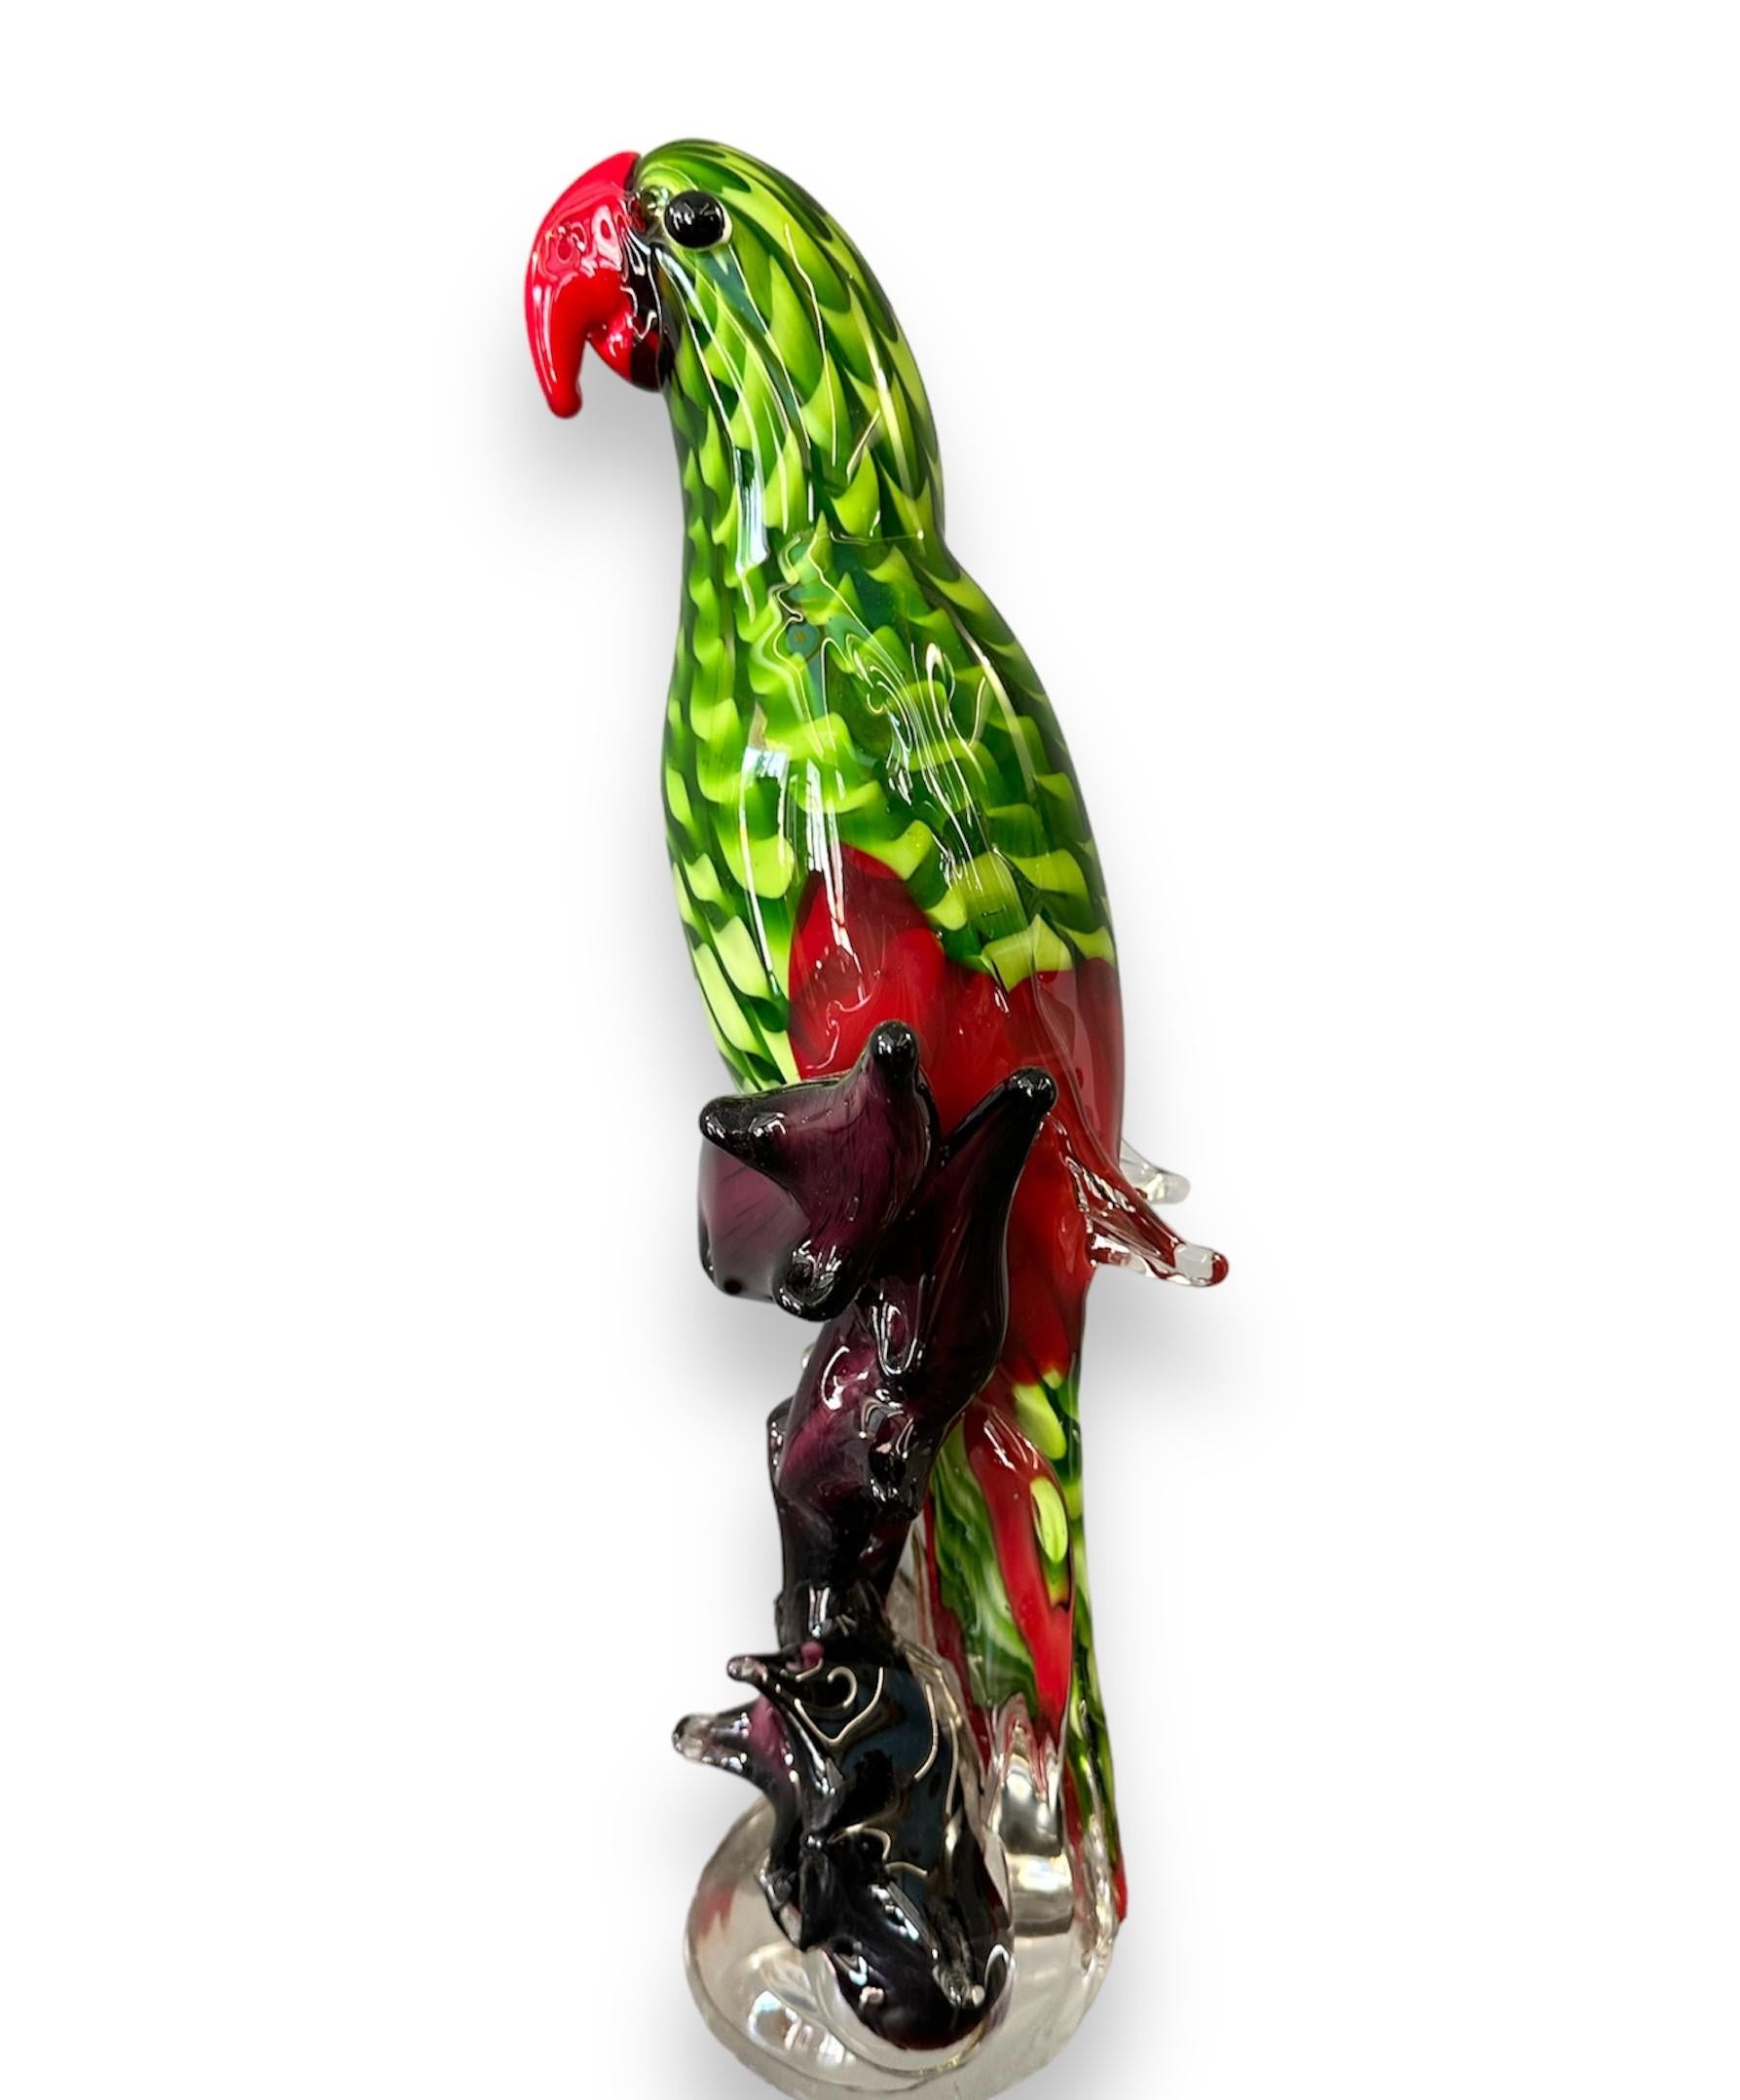 1970s, Murano glass sculpture, Parrot For Sale 2